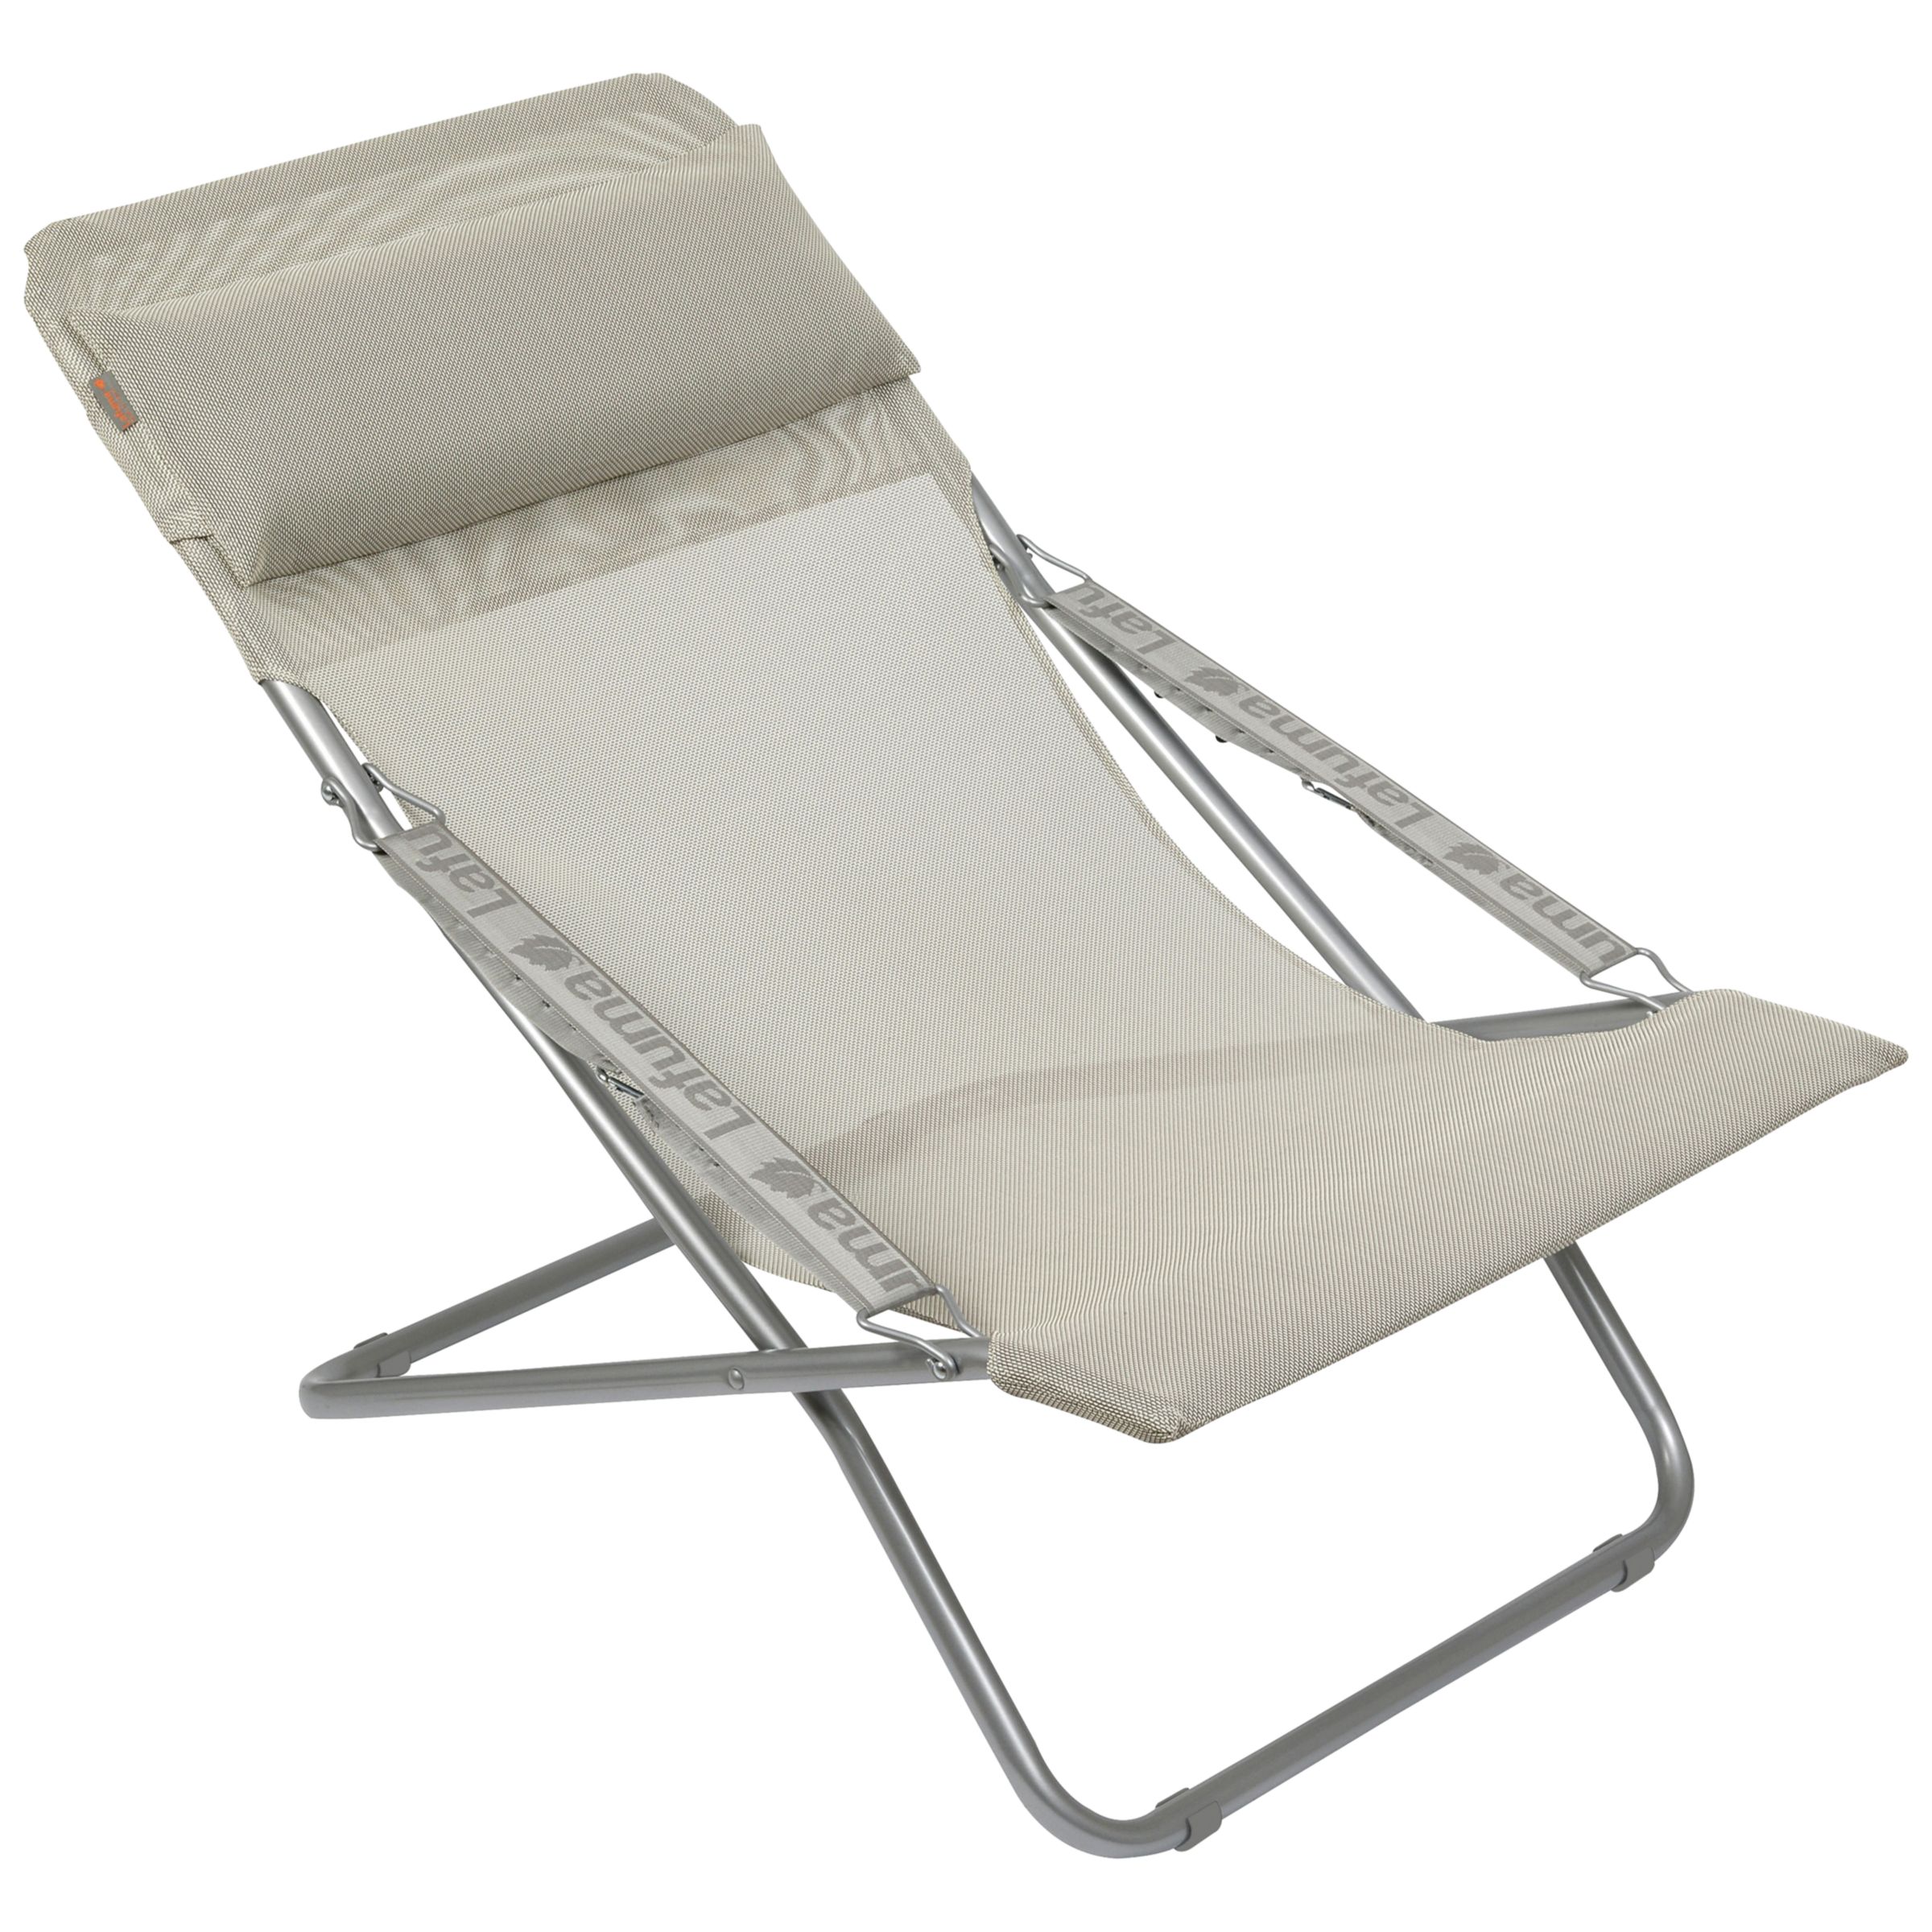 Lafuma Transabed XL Outdoor Relaxer Chair, Seigle